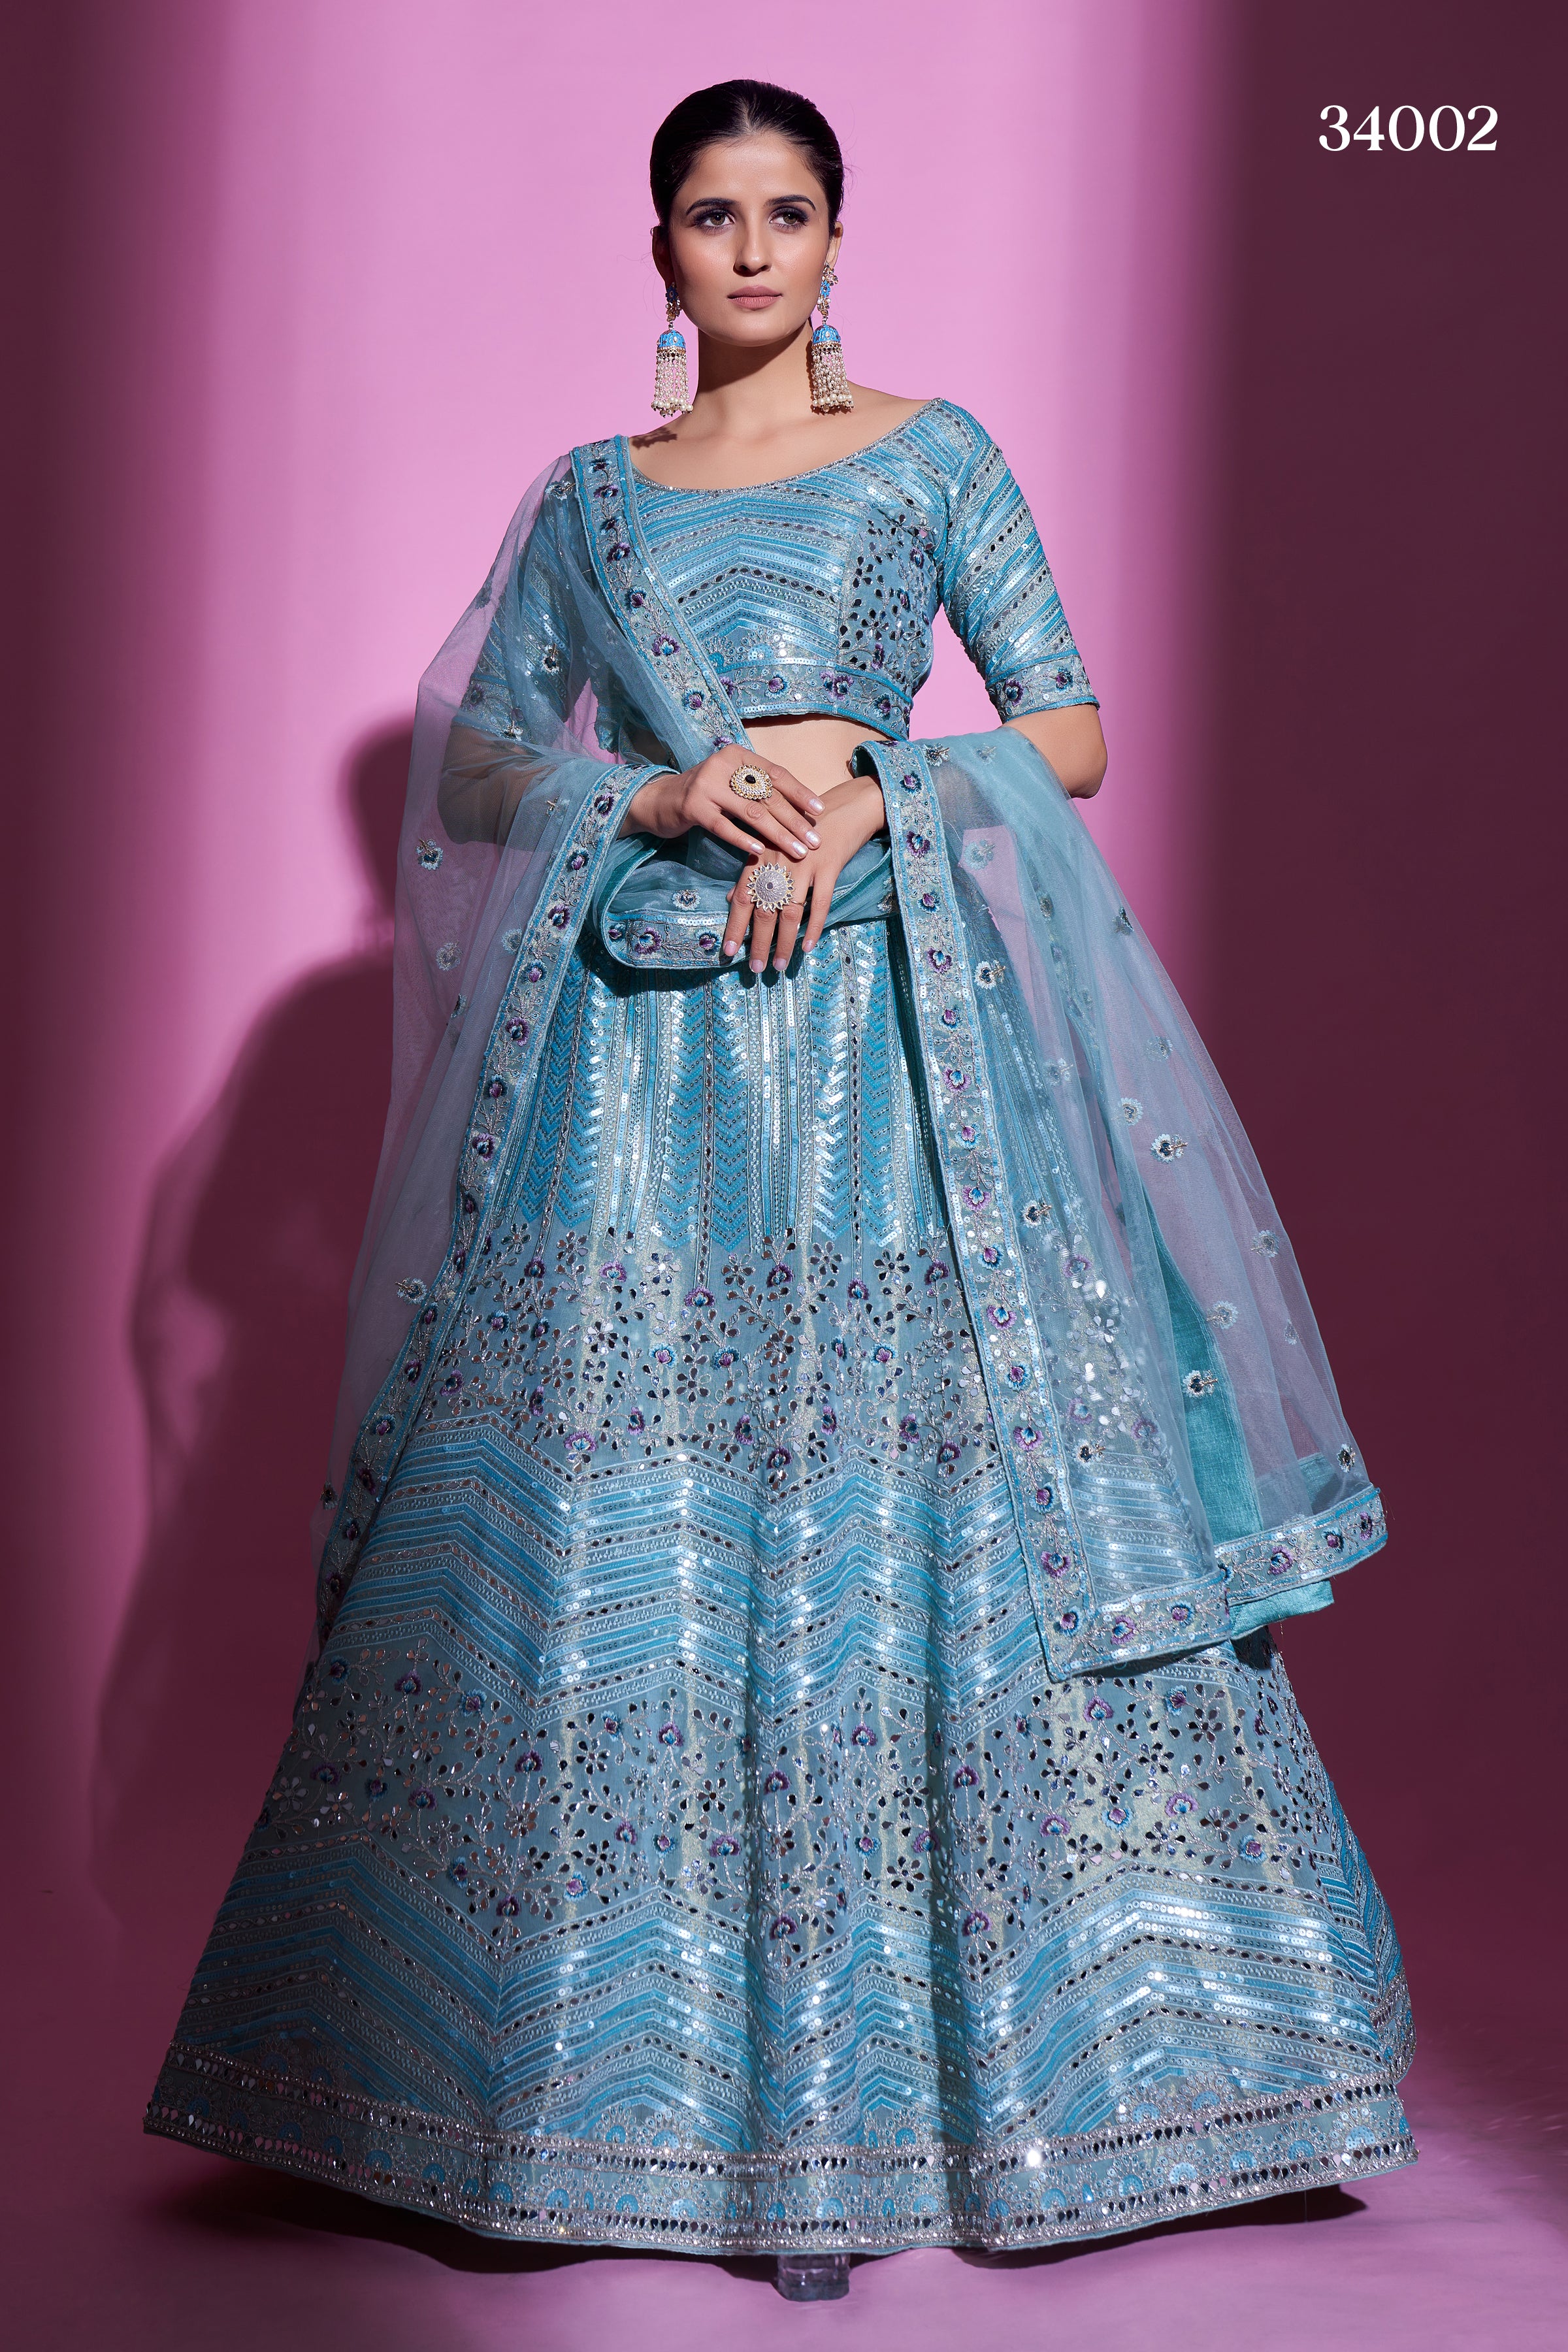 Buy Trendy Bollywood Style Lehengas Online | 1500+ Products